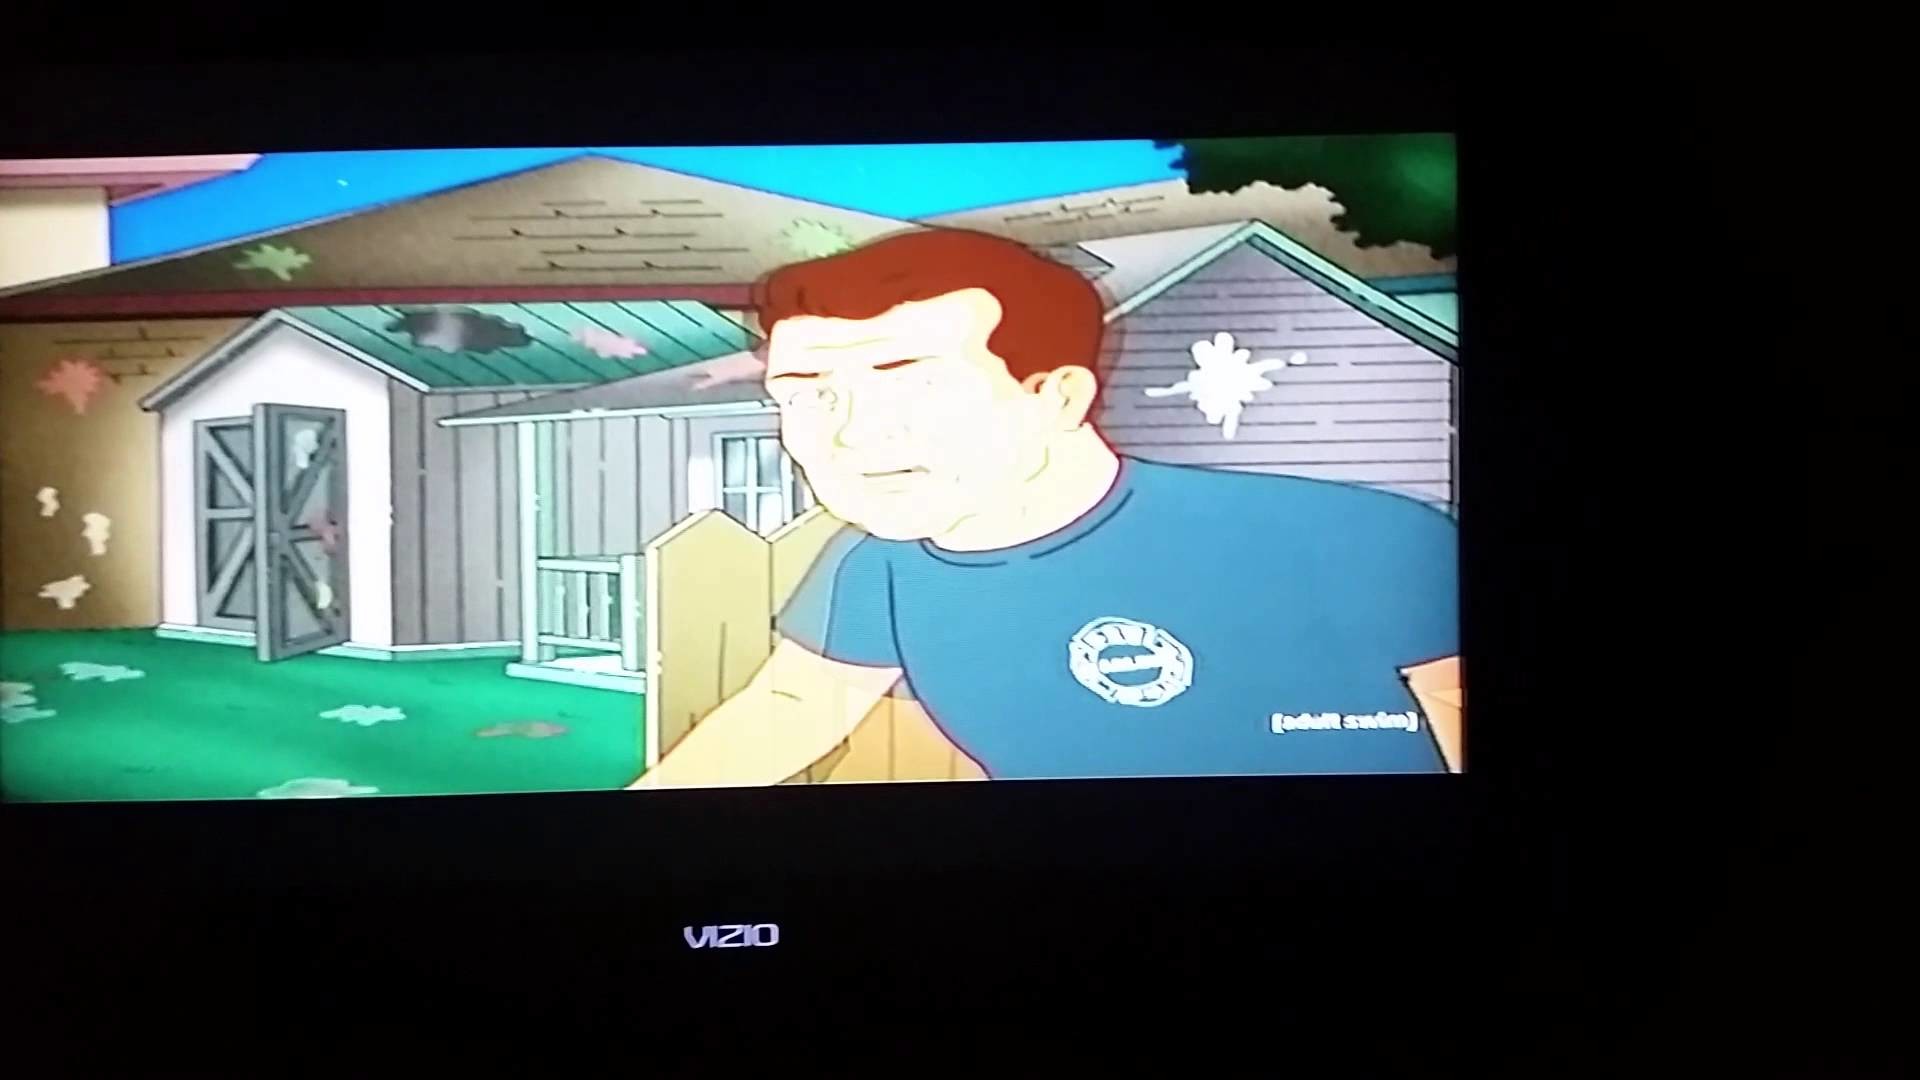 King of the hill animation error